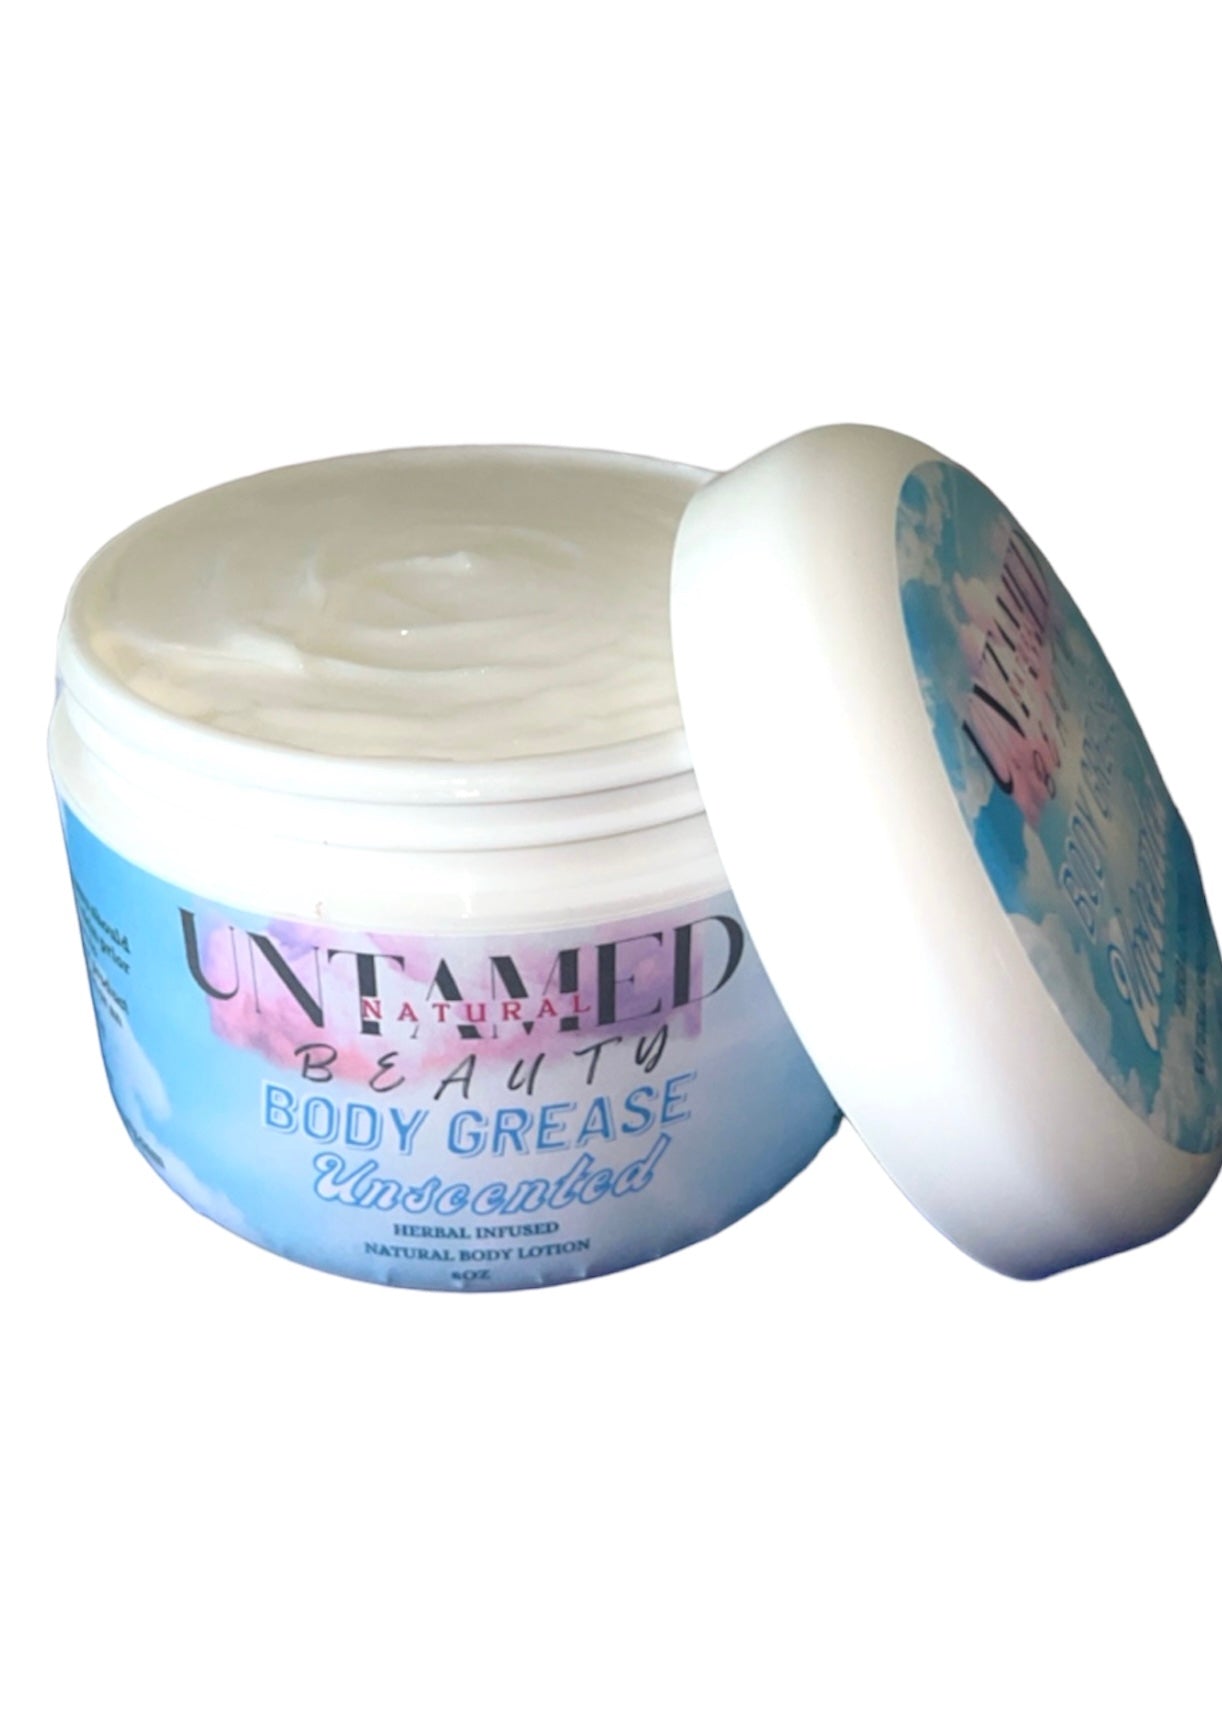 “Unscented” BODY GREASE